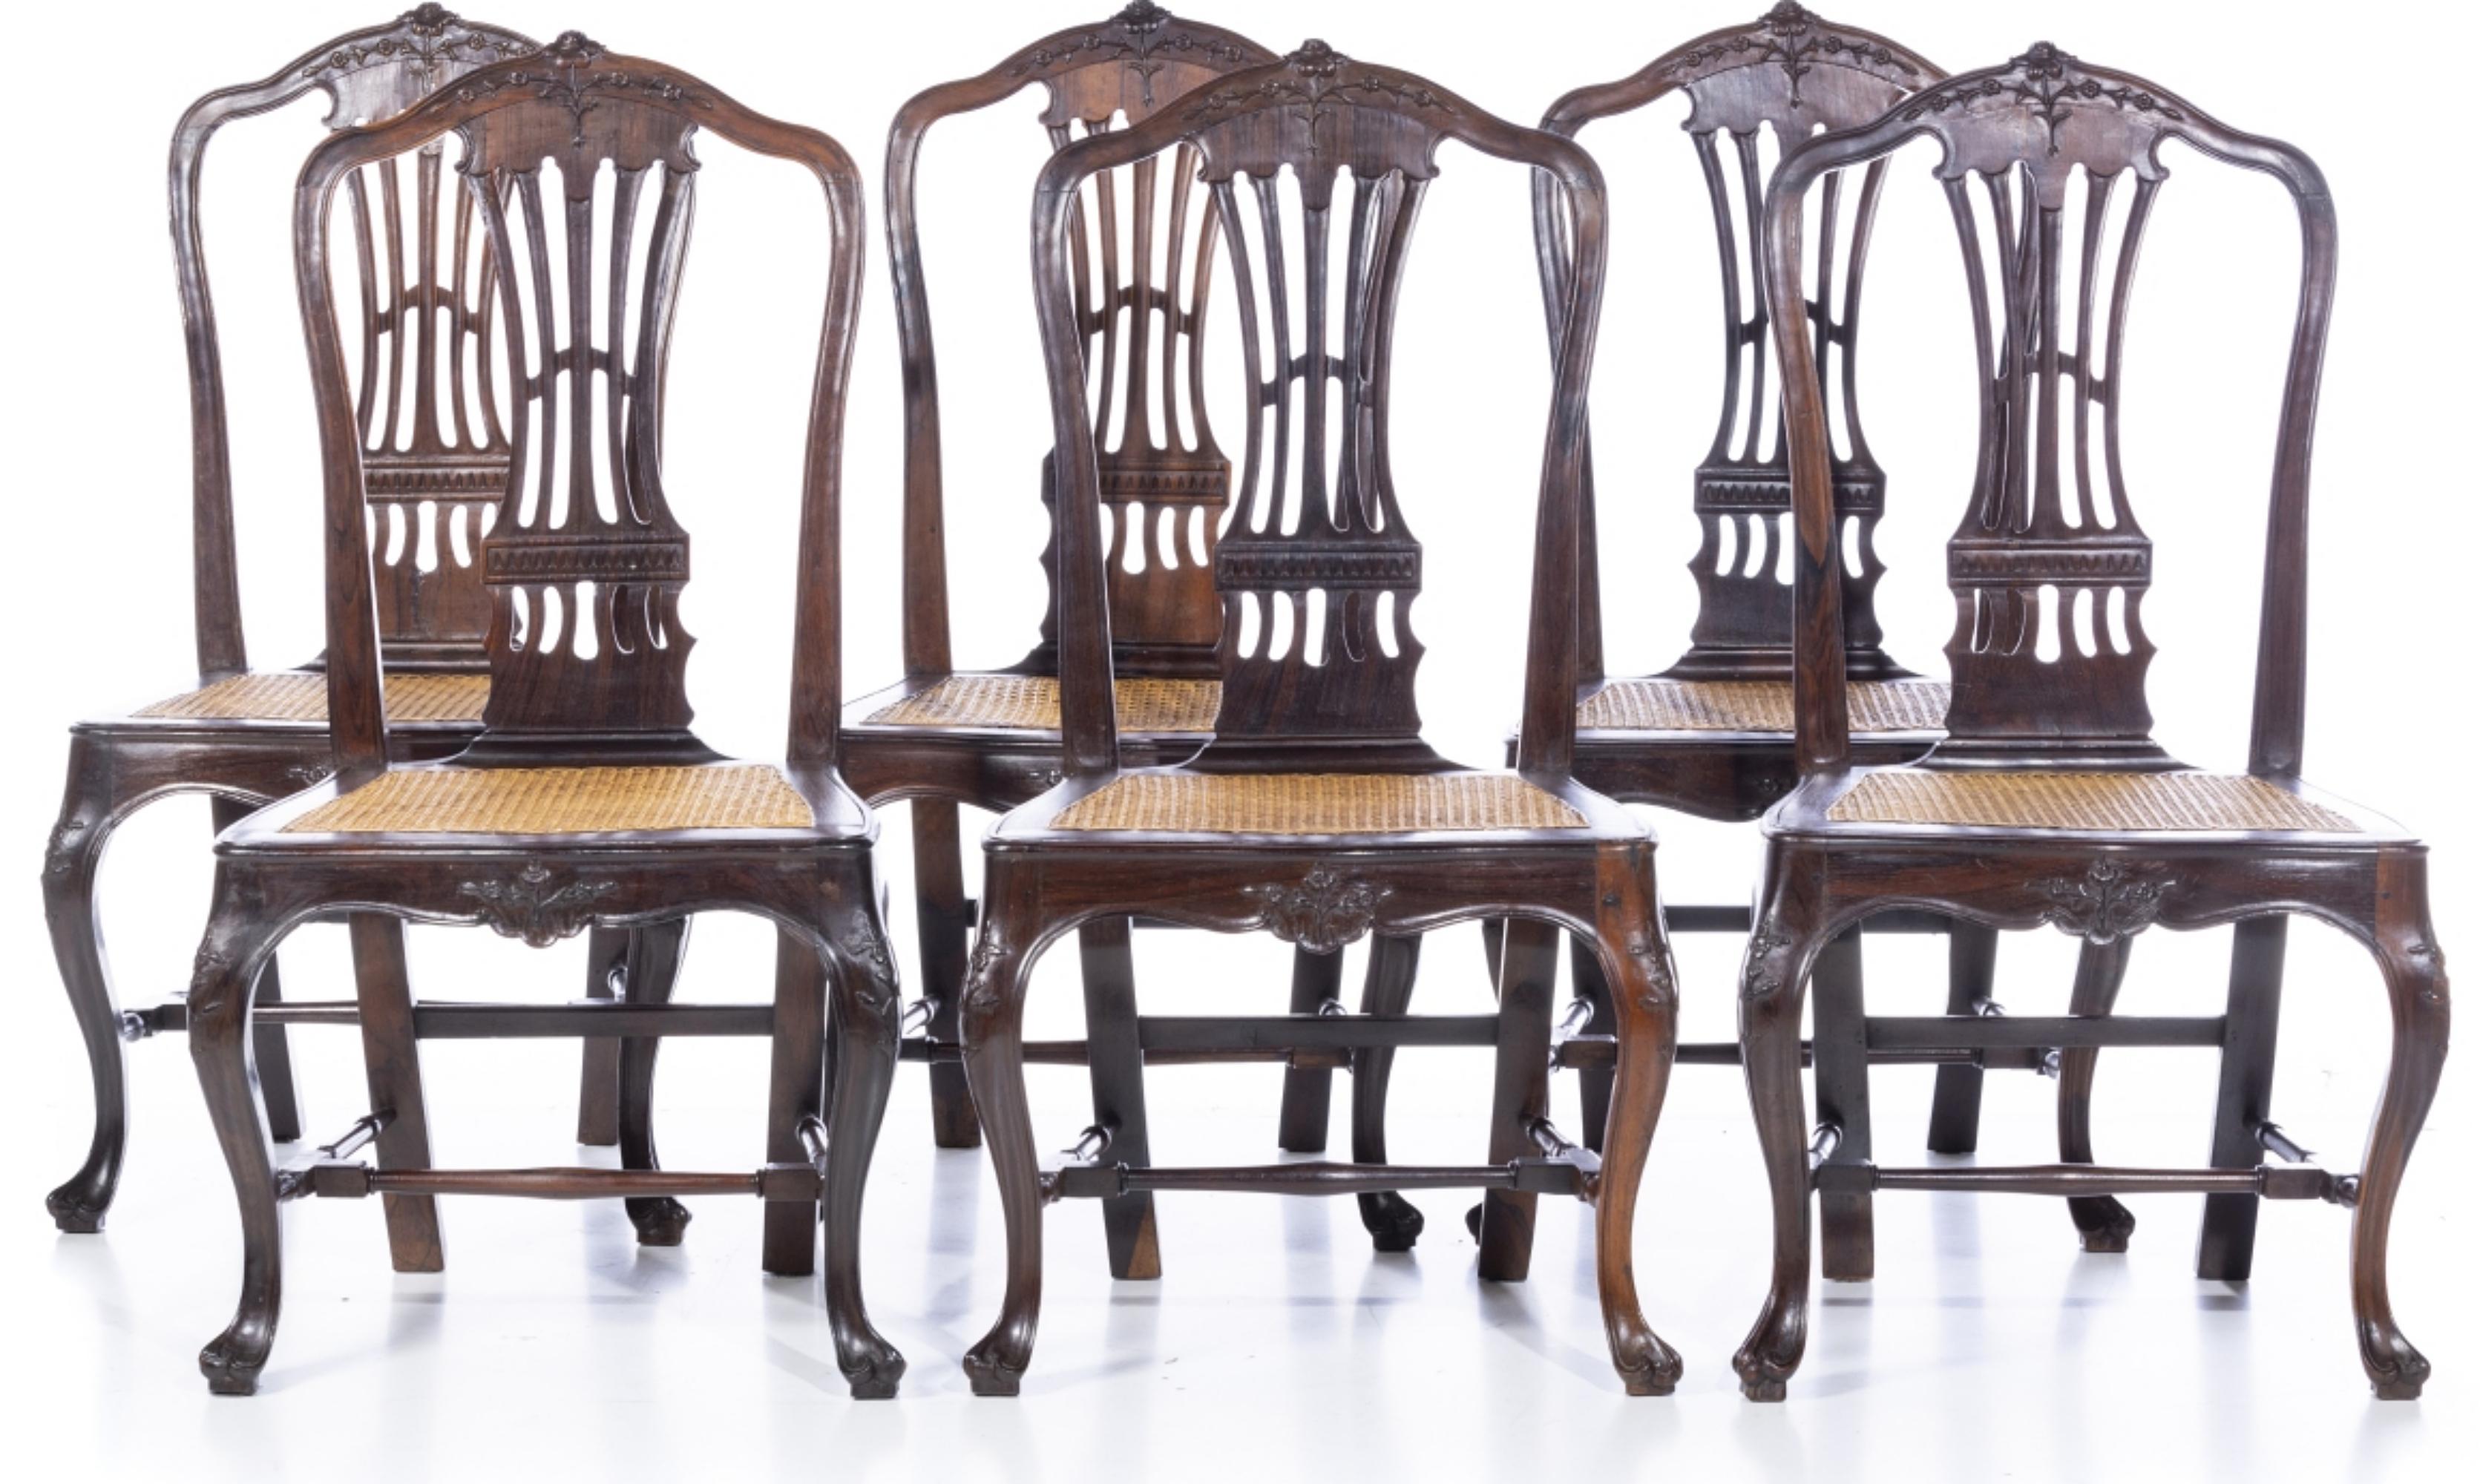 SET OF SIX PORTUGUESE CHAIRS

18th Century
in Brazilian rosewood, with carvings in the central table, cut and squared. Seats in straw. Signs of use.
Dim.: 102 x 51 x 43 cm.
very good condition